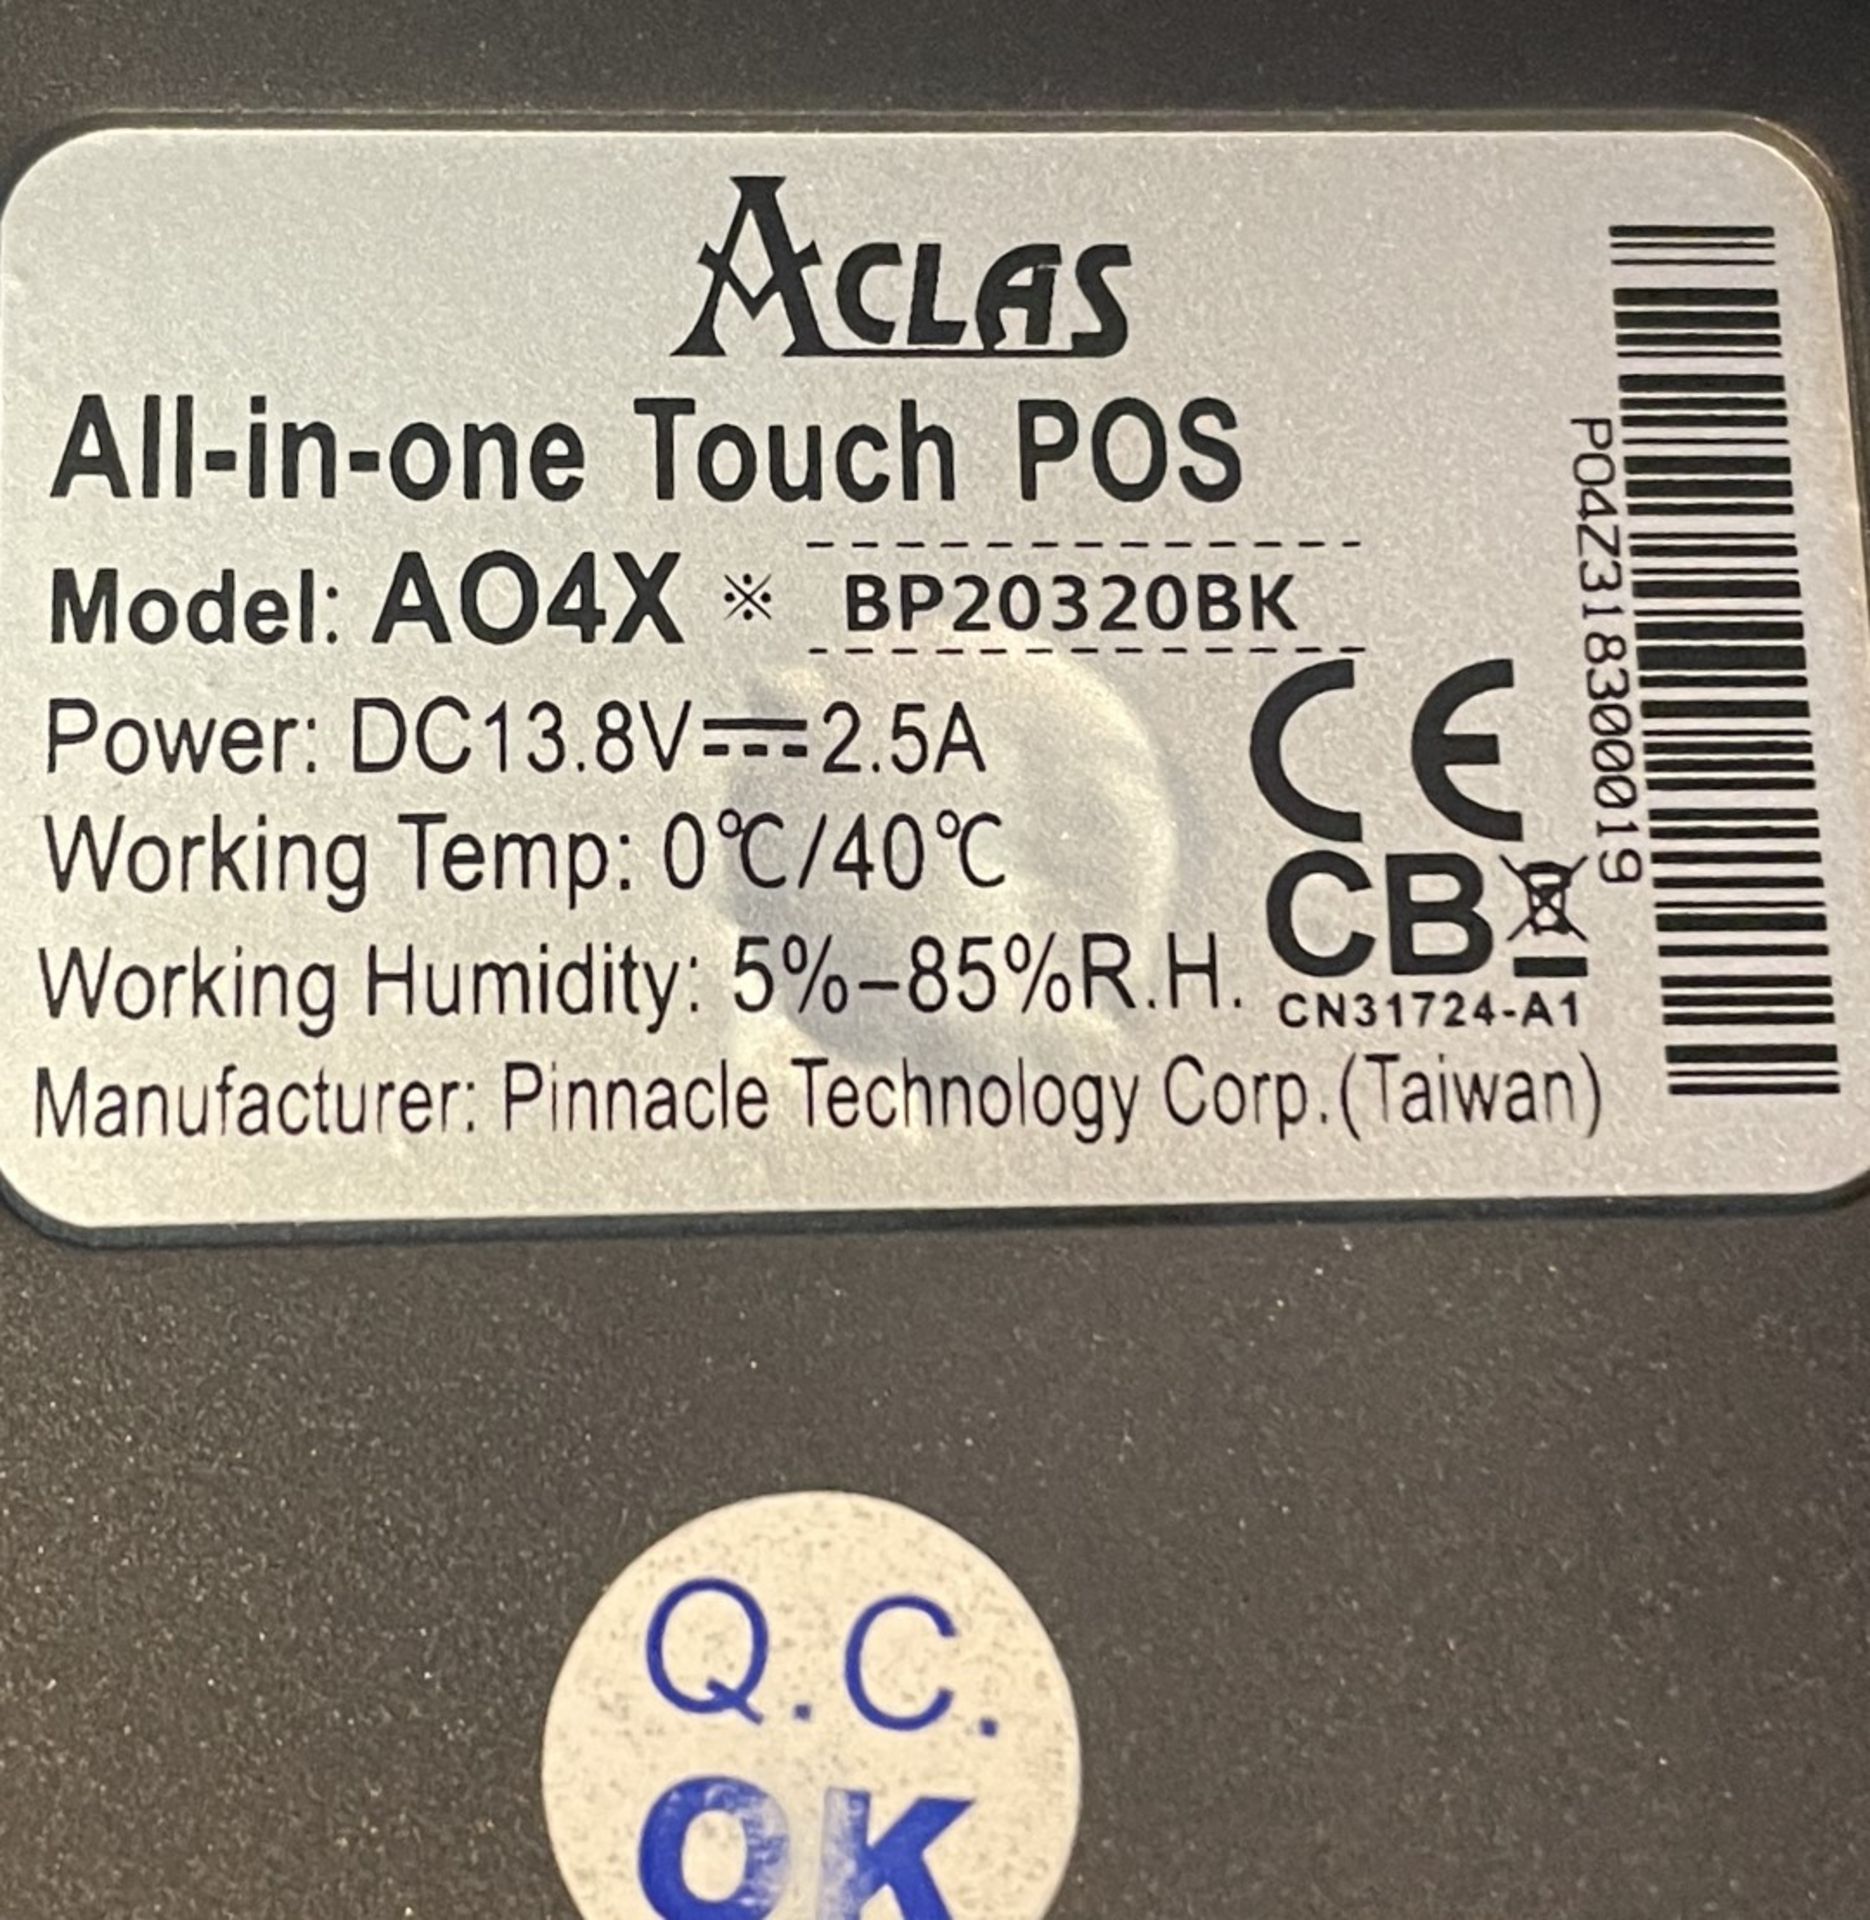 1 x Aclas AO4X All in One 10.1" Touch Screen Fiscal POS With Android OS, Integrated Receipt Printer - Image 4 of 4